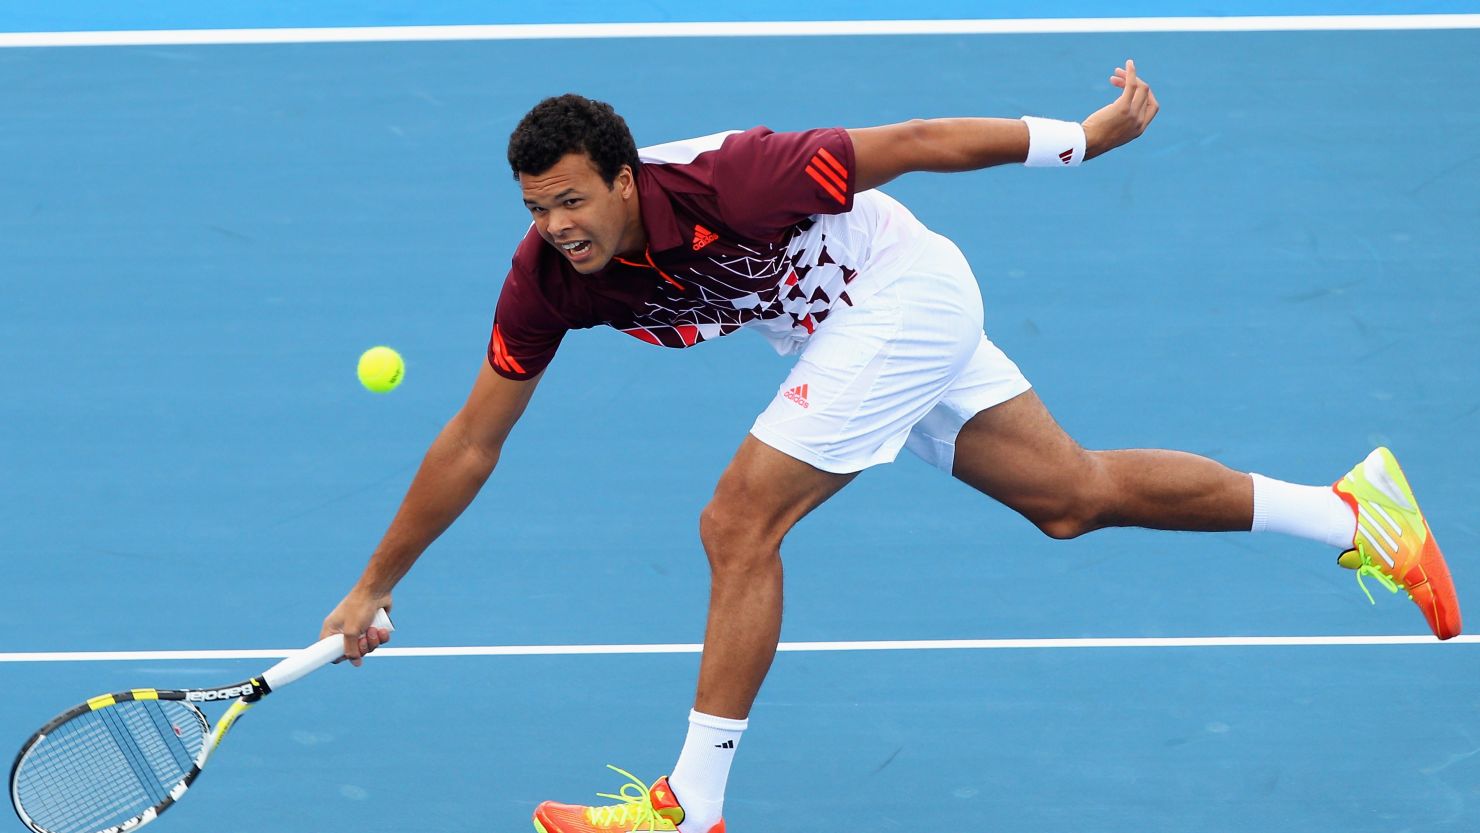 Fatigue and a troublesome wind both contributed to Jo-Wilfried Tsonga's defeat  at the Kooyong Classic.